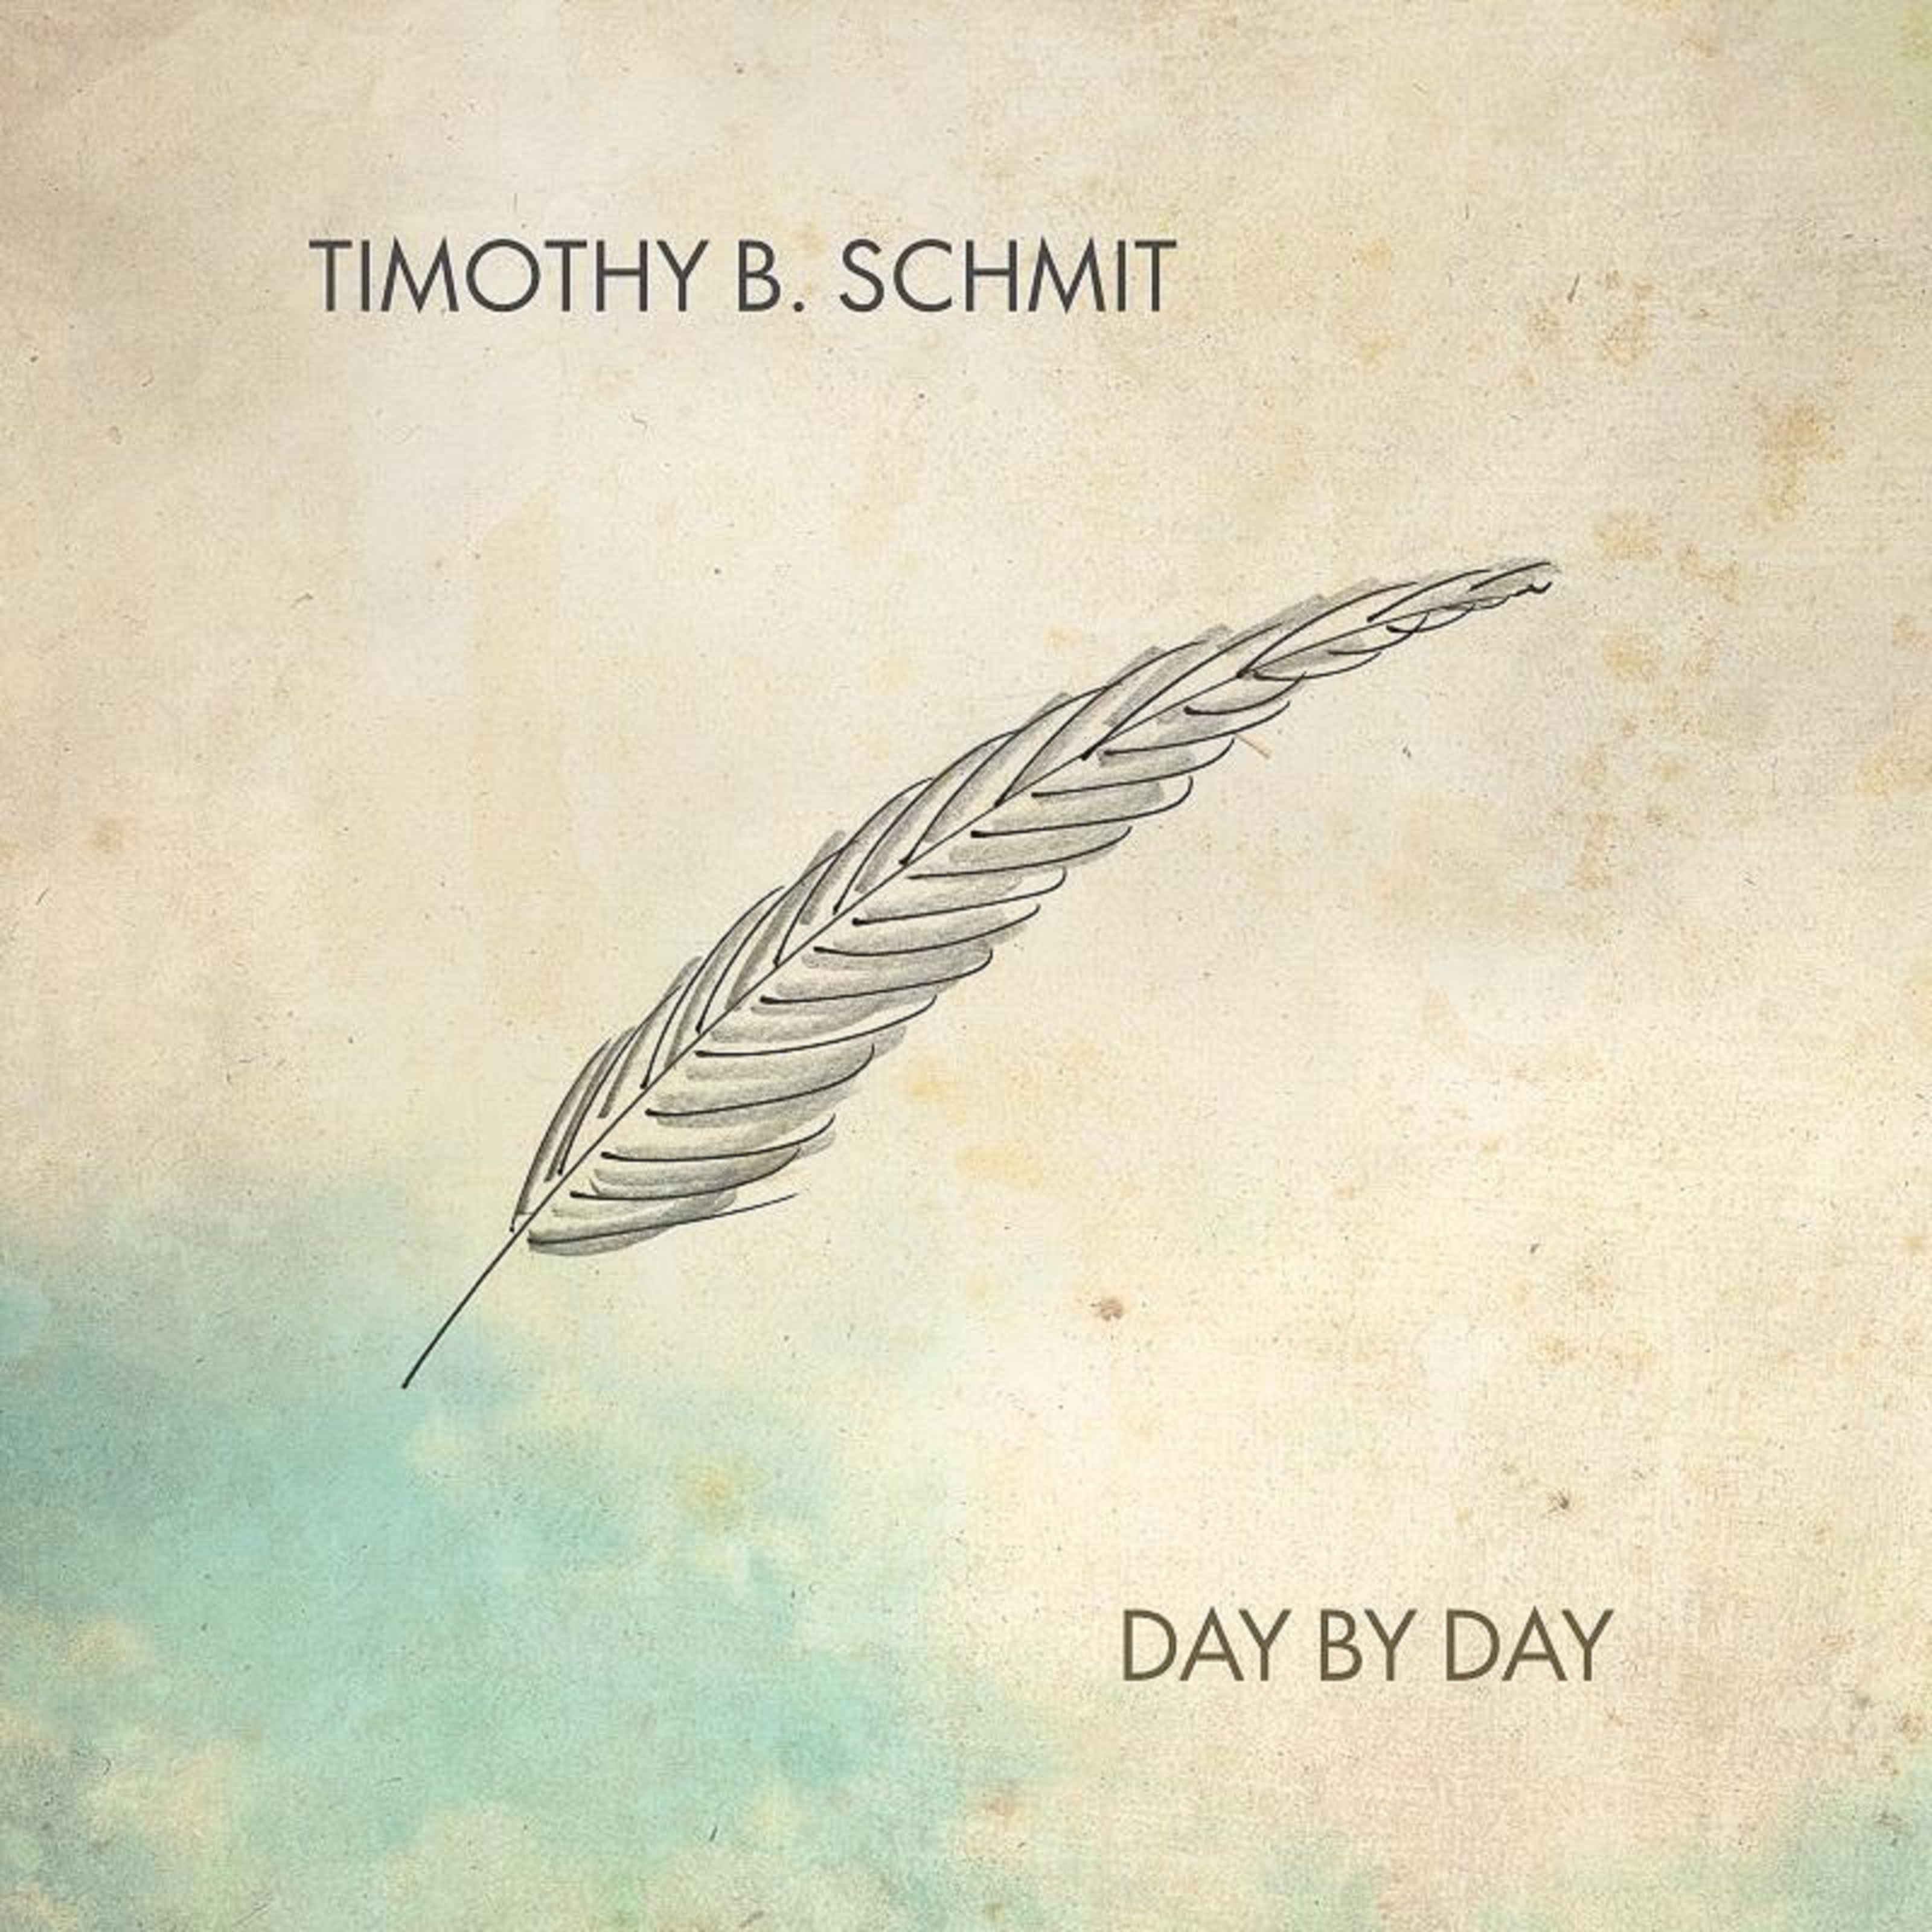 TIMOTHY B. SCHMIT Celebrates Today’s Release Of ‘Day By Day’ Album With Video For Its Third Single “I Come Alive”